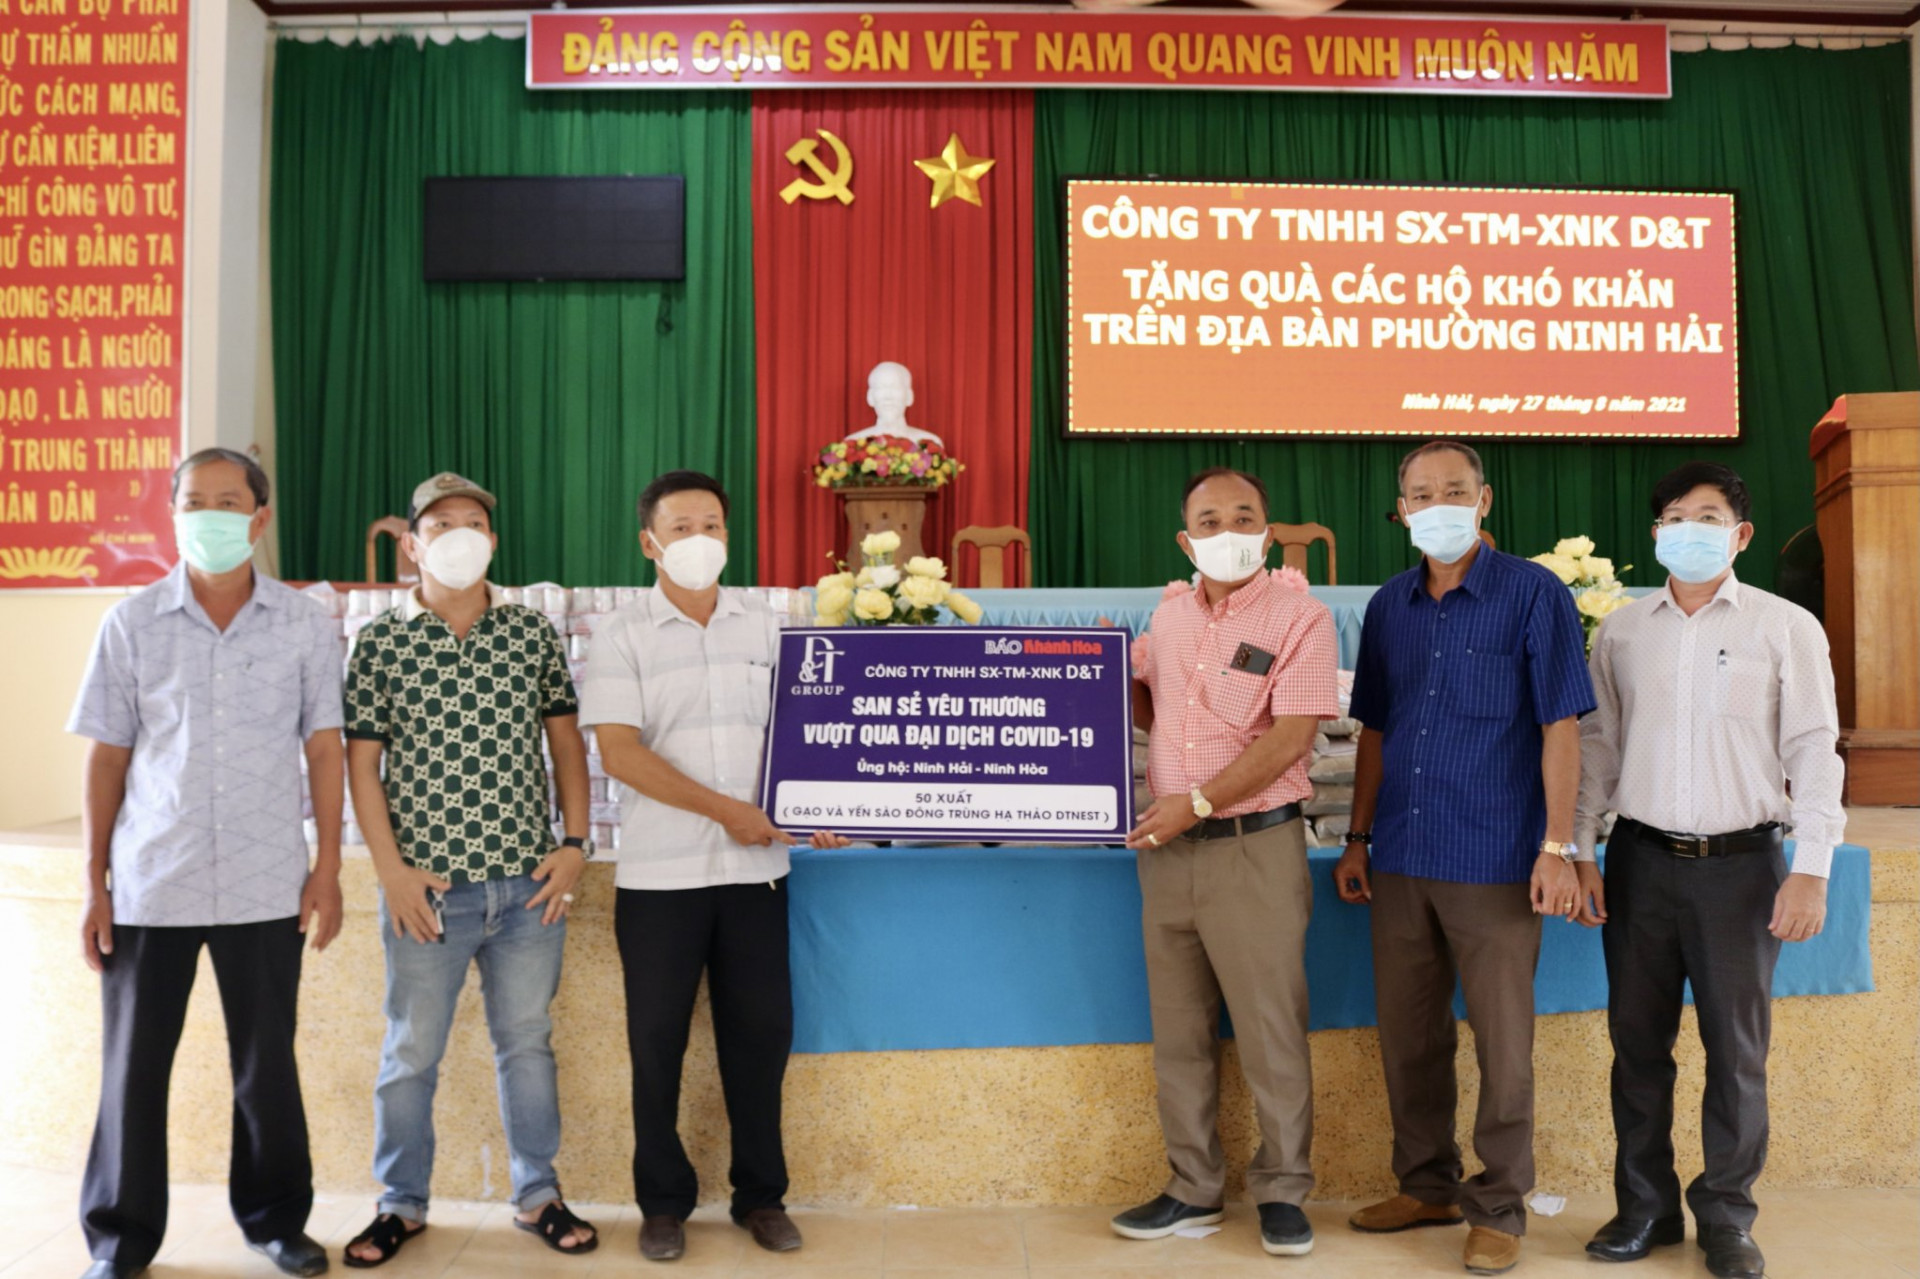 Delegation offering gifts at Ninh Hai Ward People's Committee (Ninh Hoa Town)